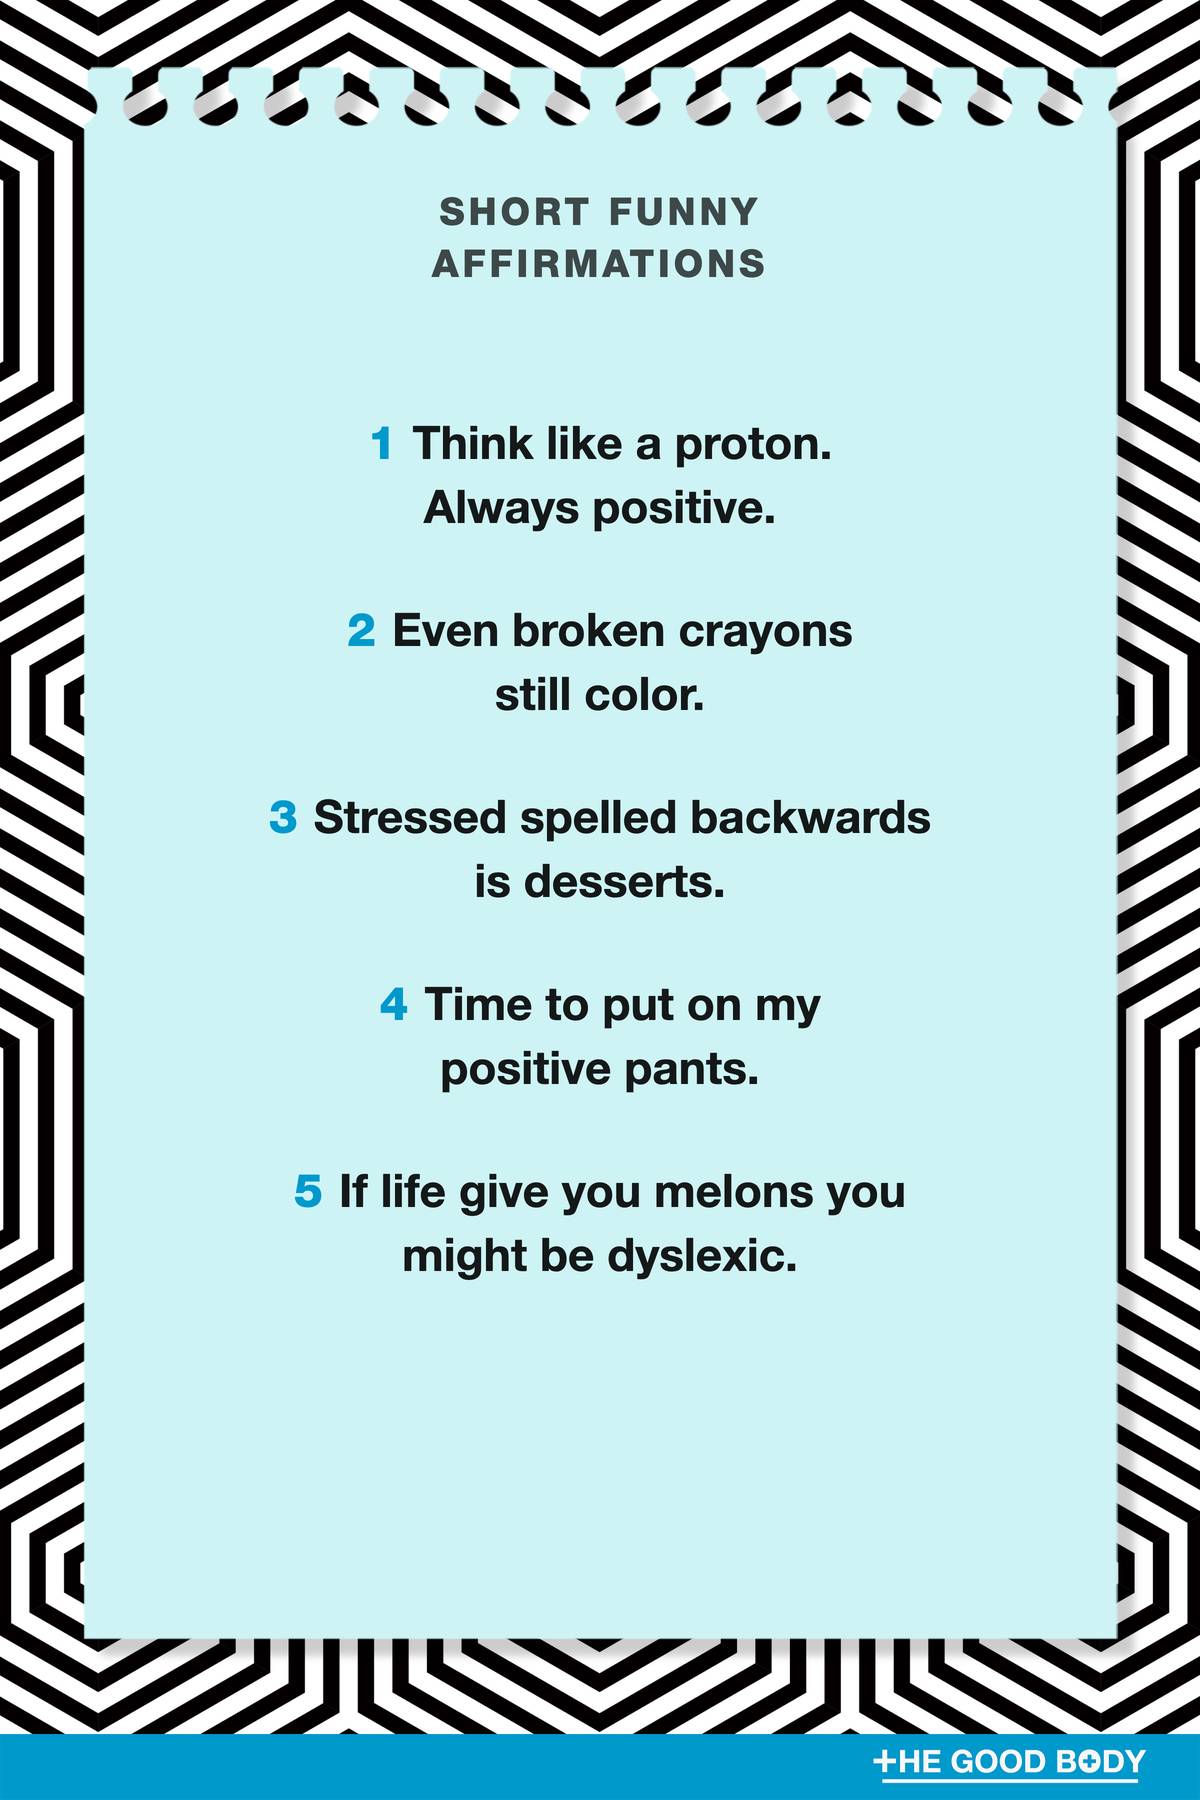 5 Short Funny Affirmations on Blue Note Paper with Optical Illusion Background